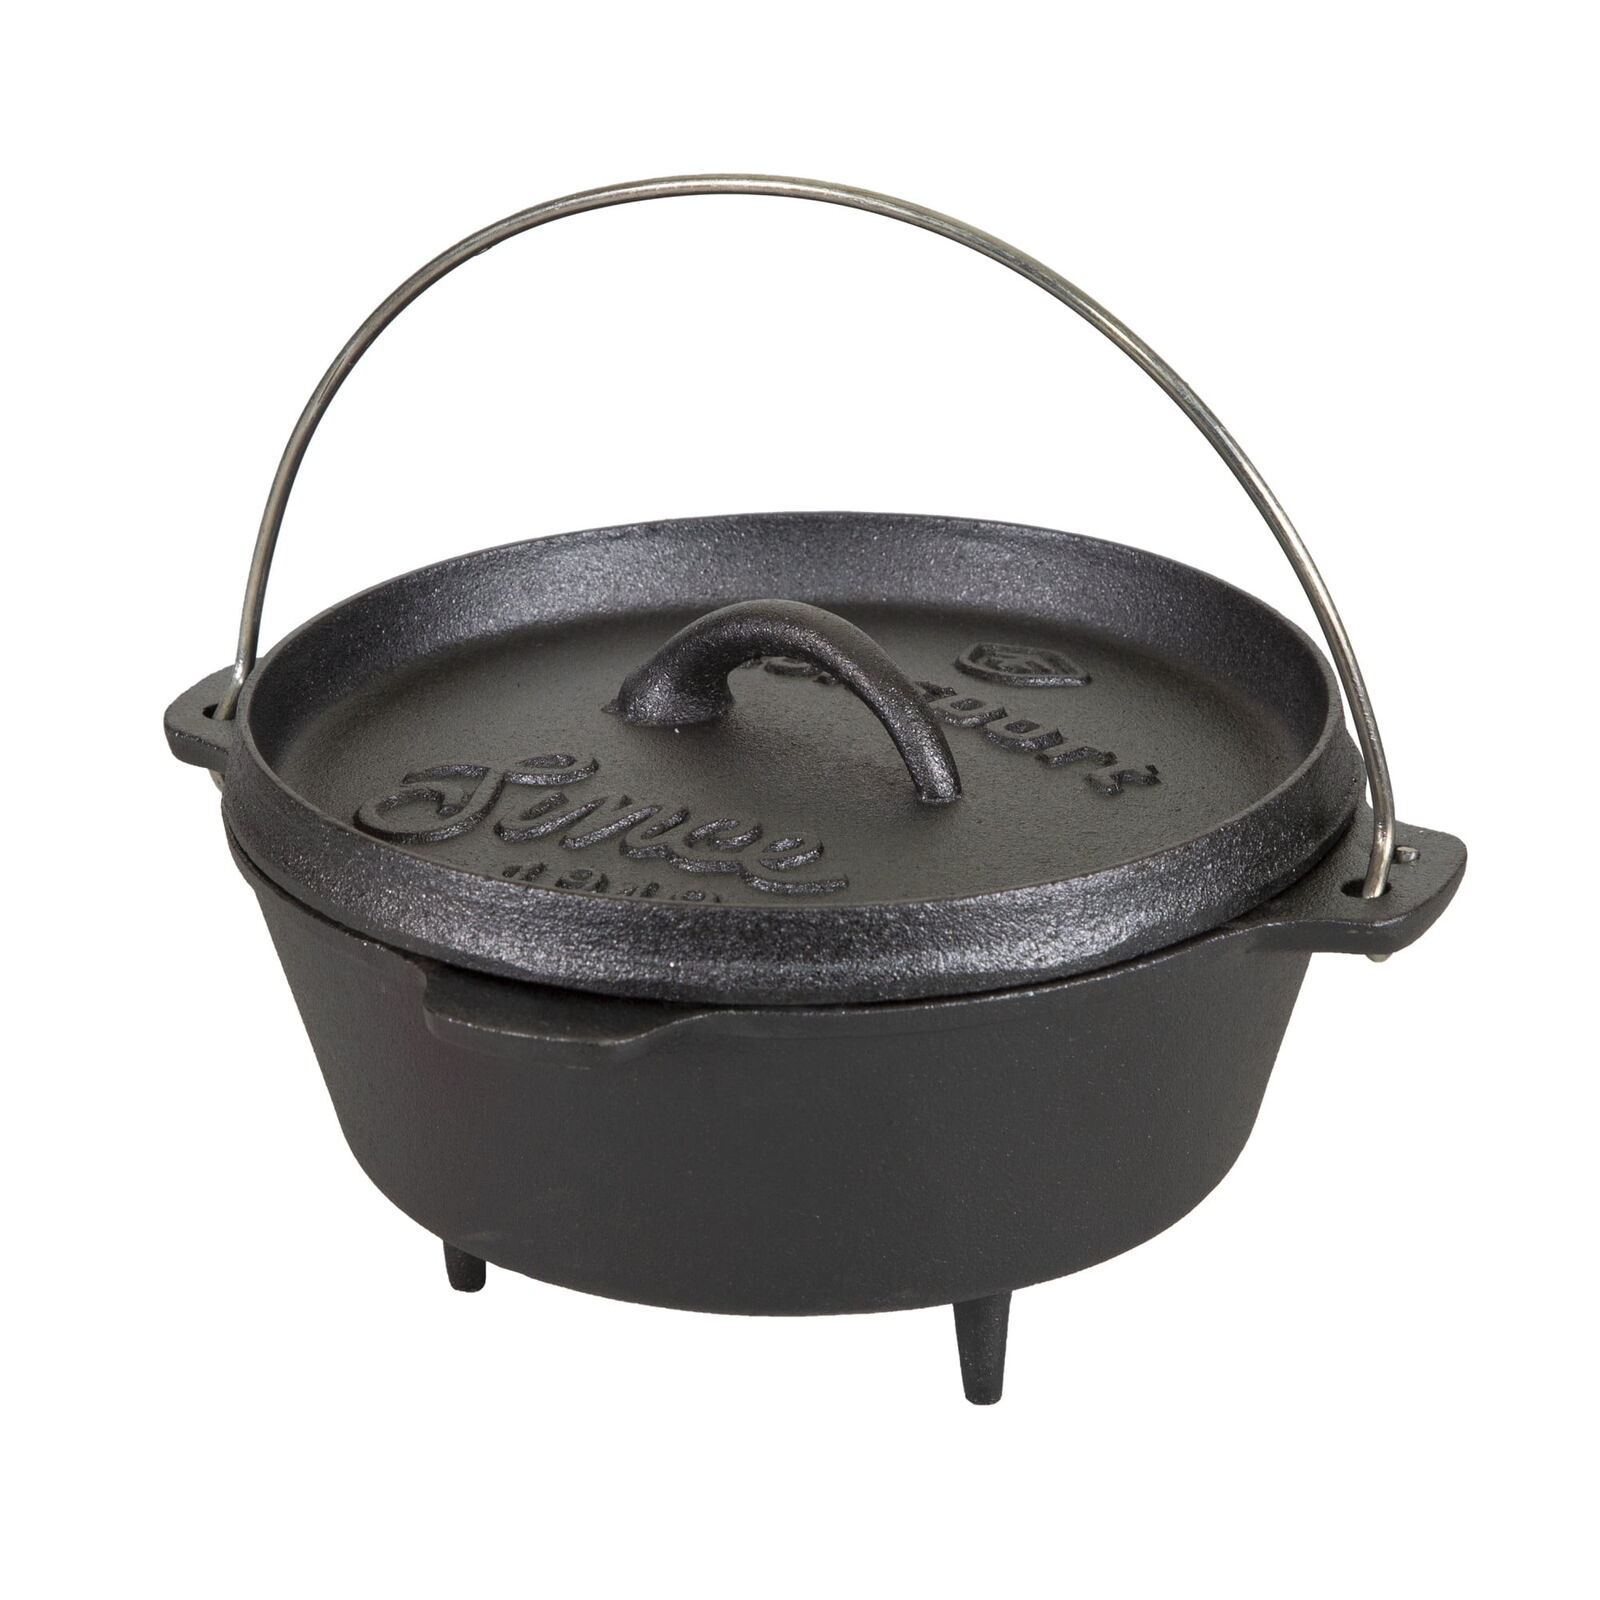 Stansport 2 QT Pre-Seasoned Cast Iron Dutch Oven with Legs